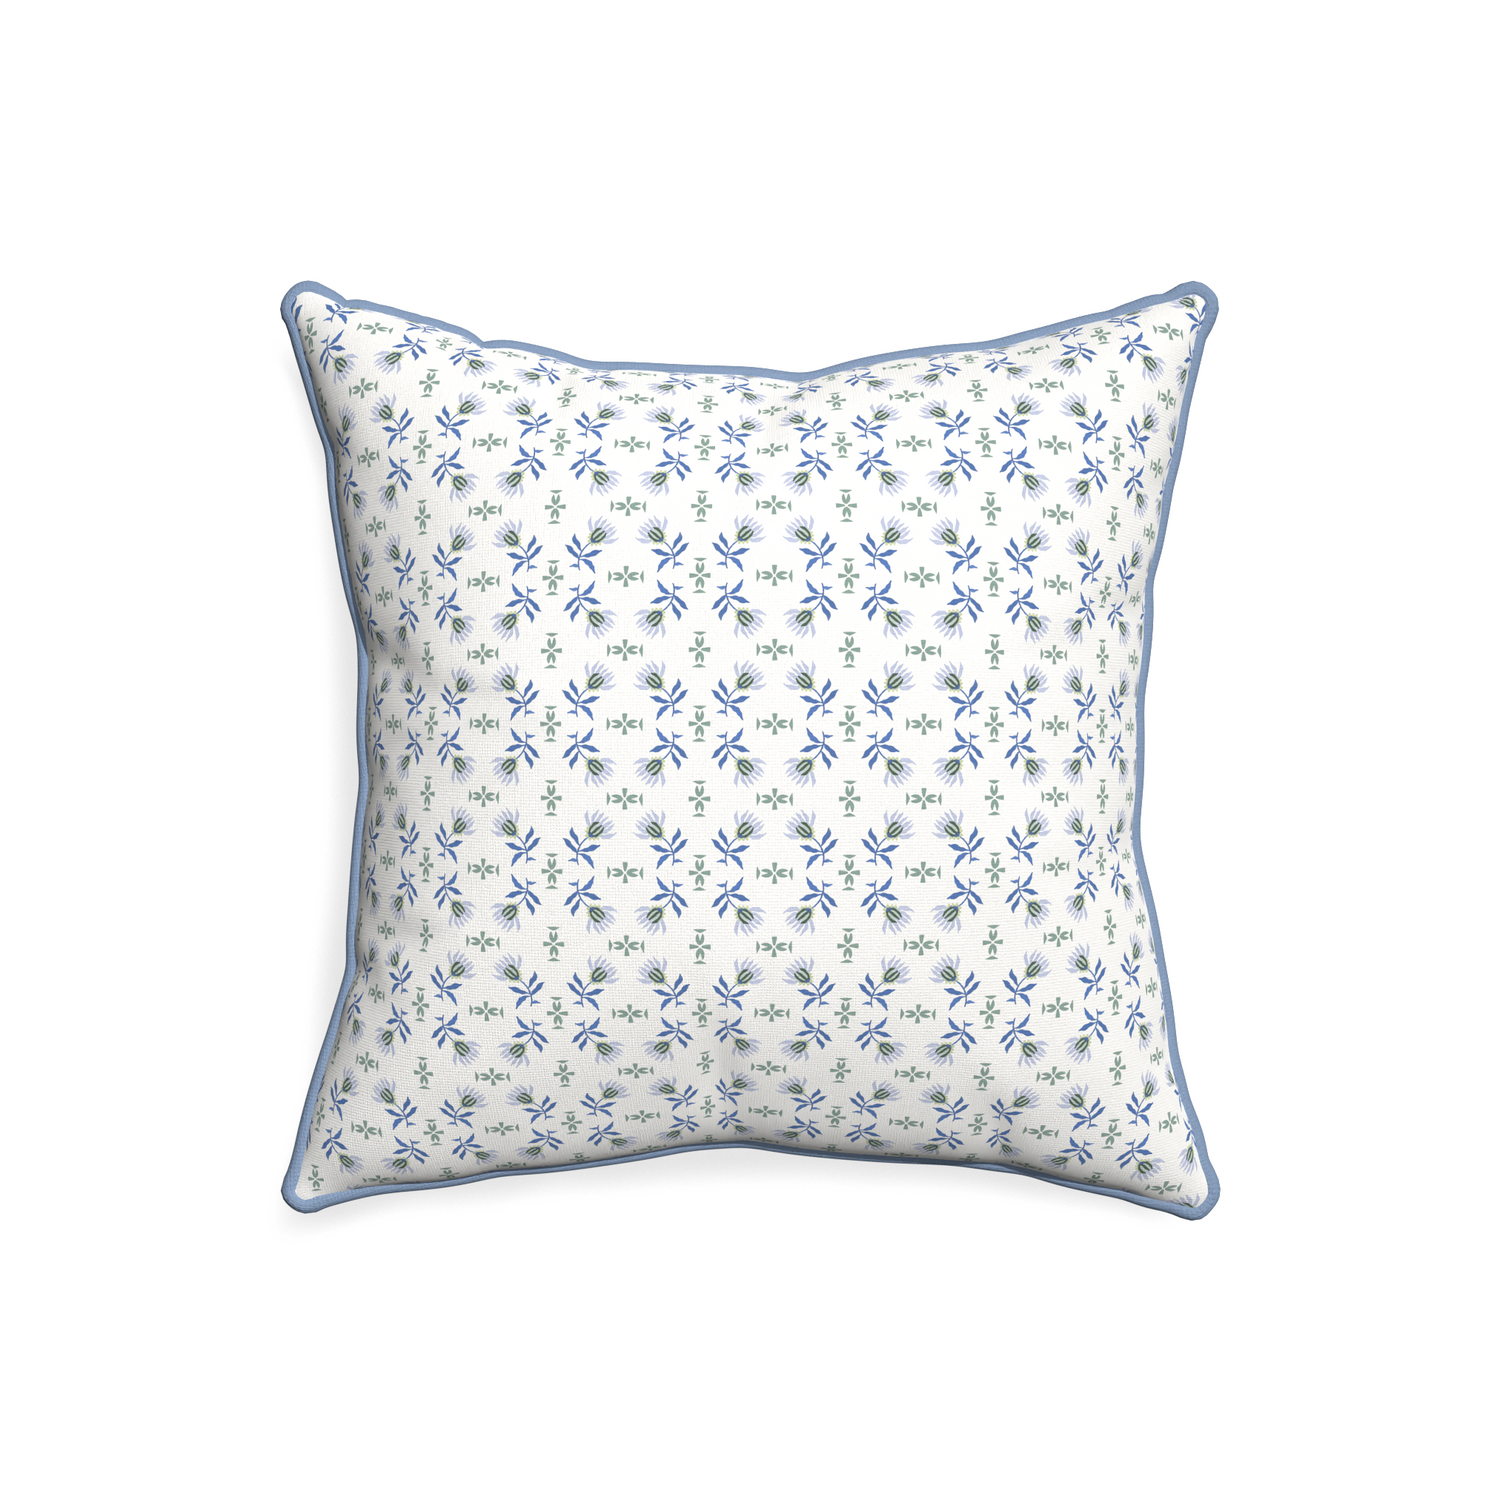 20-square lee custom pillow with sky piping on white background